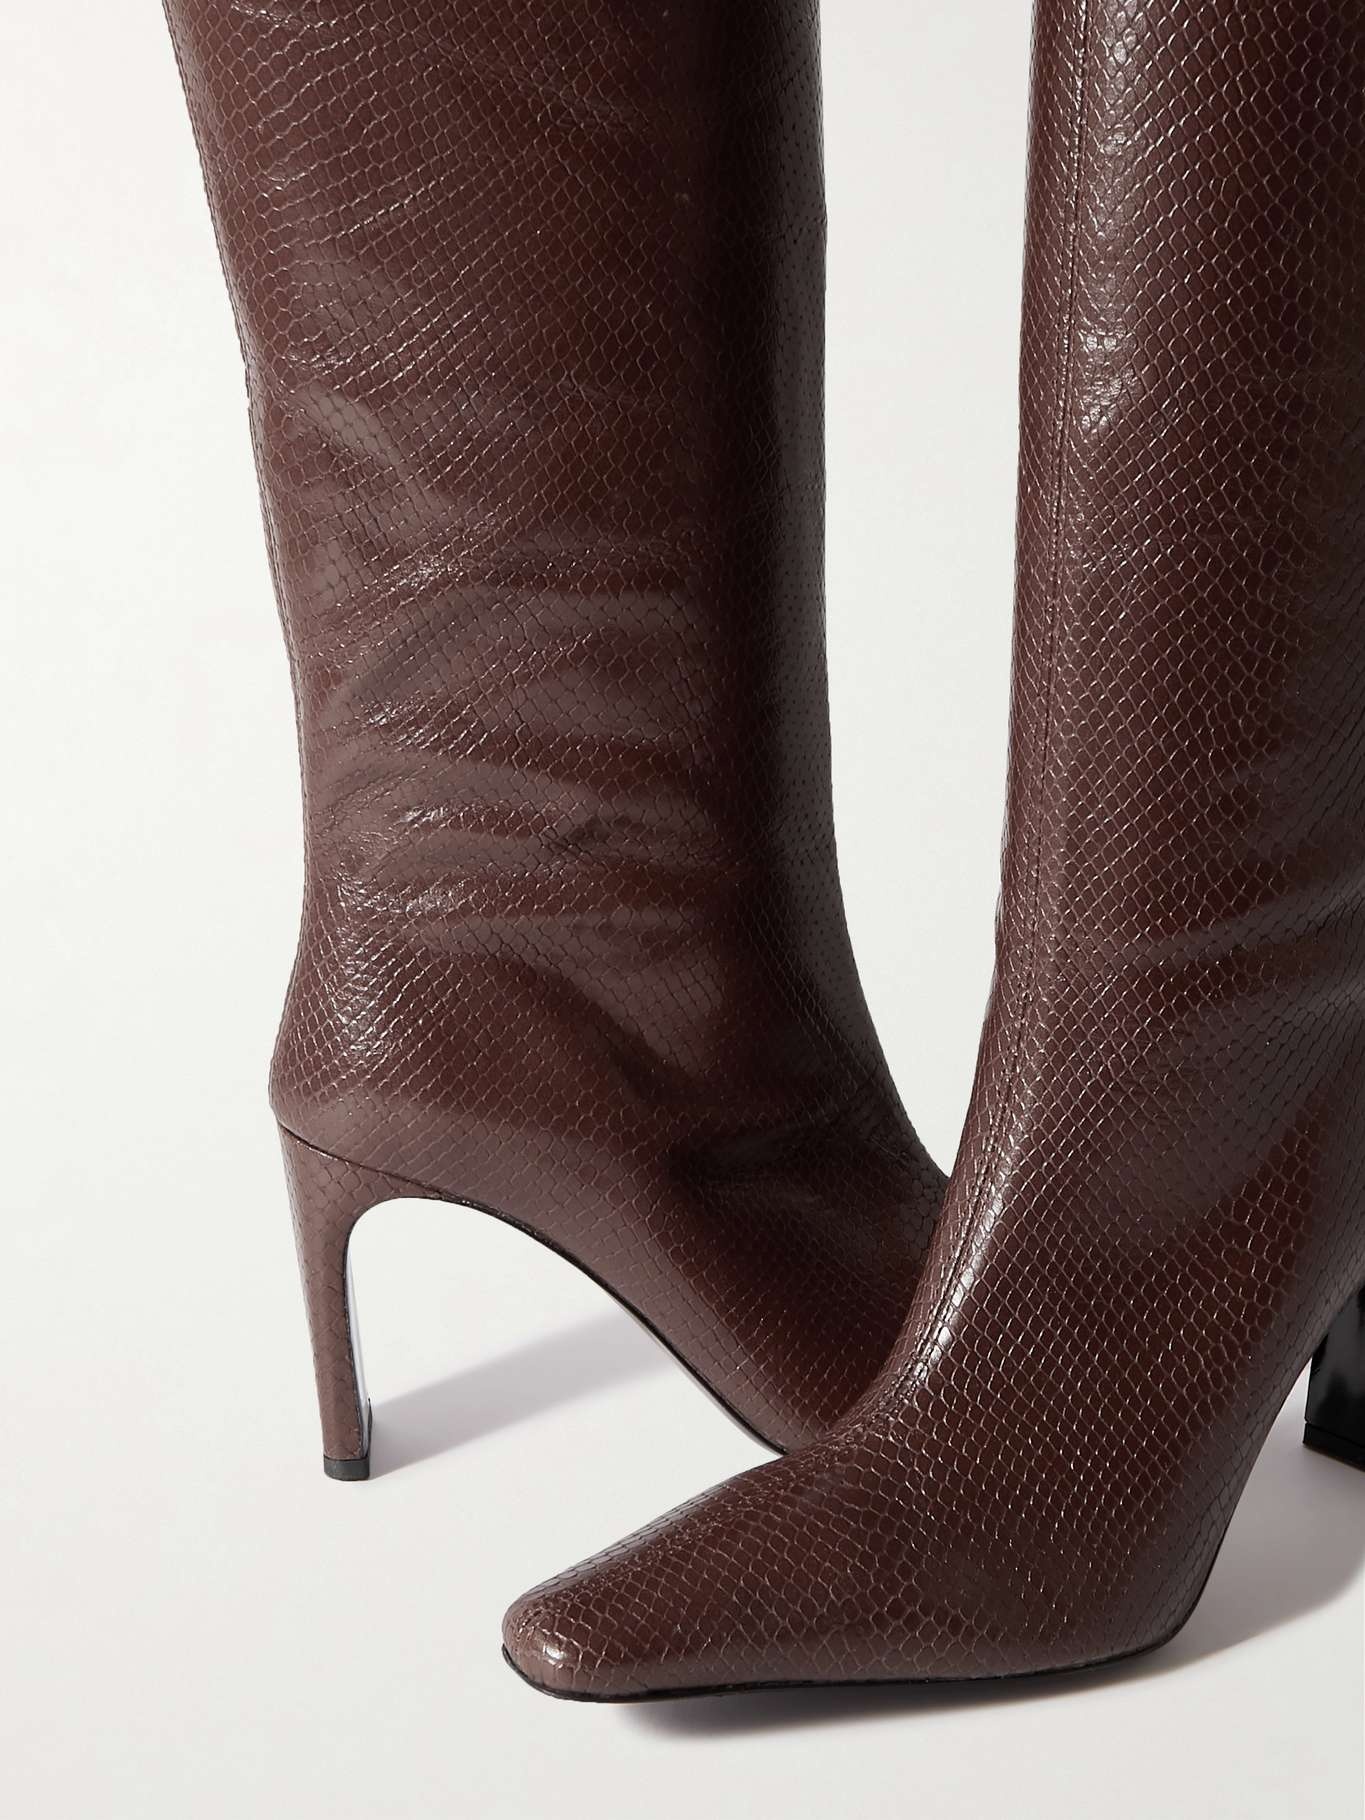 Wally lizard-effect leather knee boots - 4